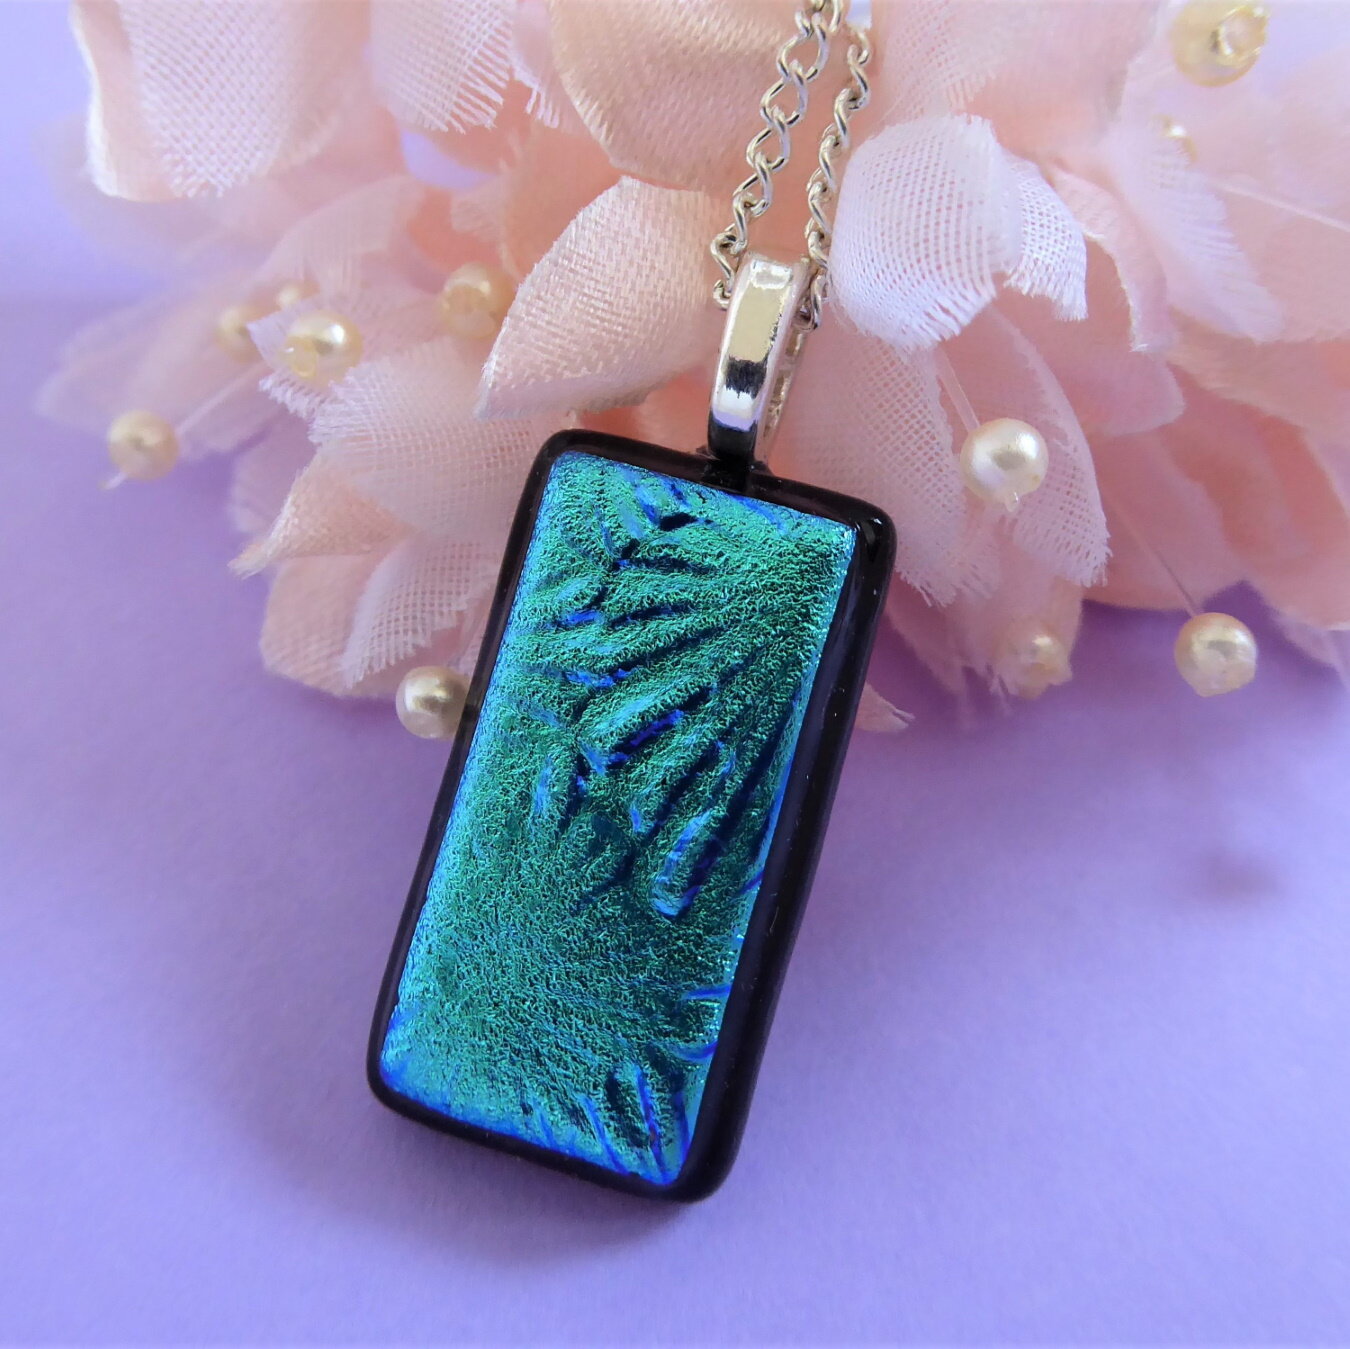 Teal green and black fused glass pendant